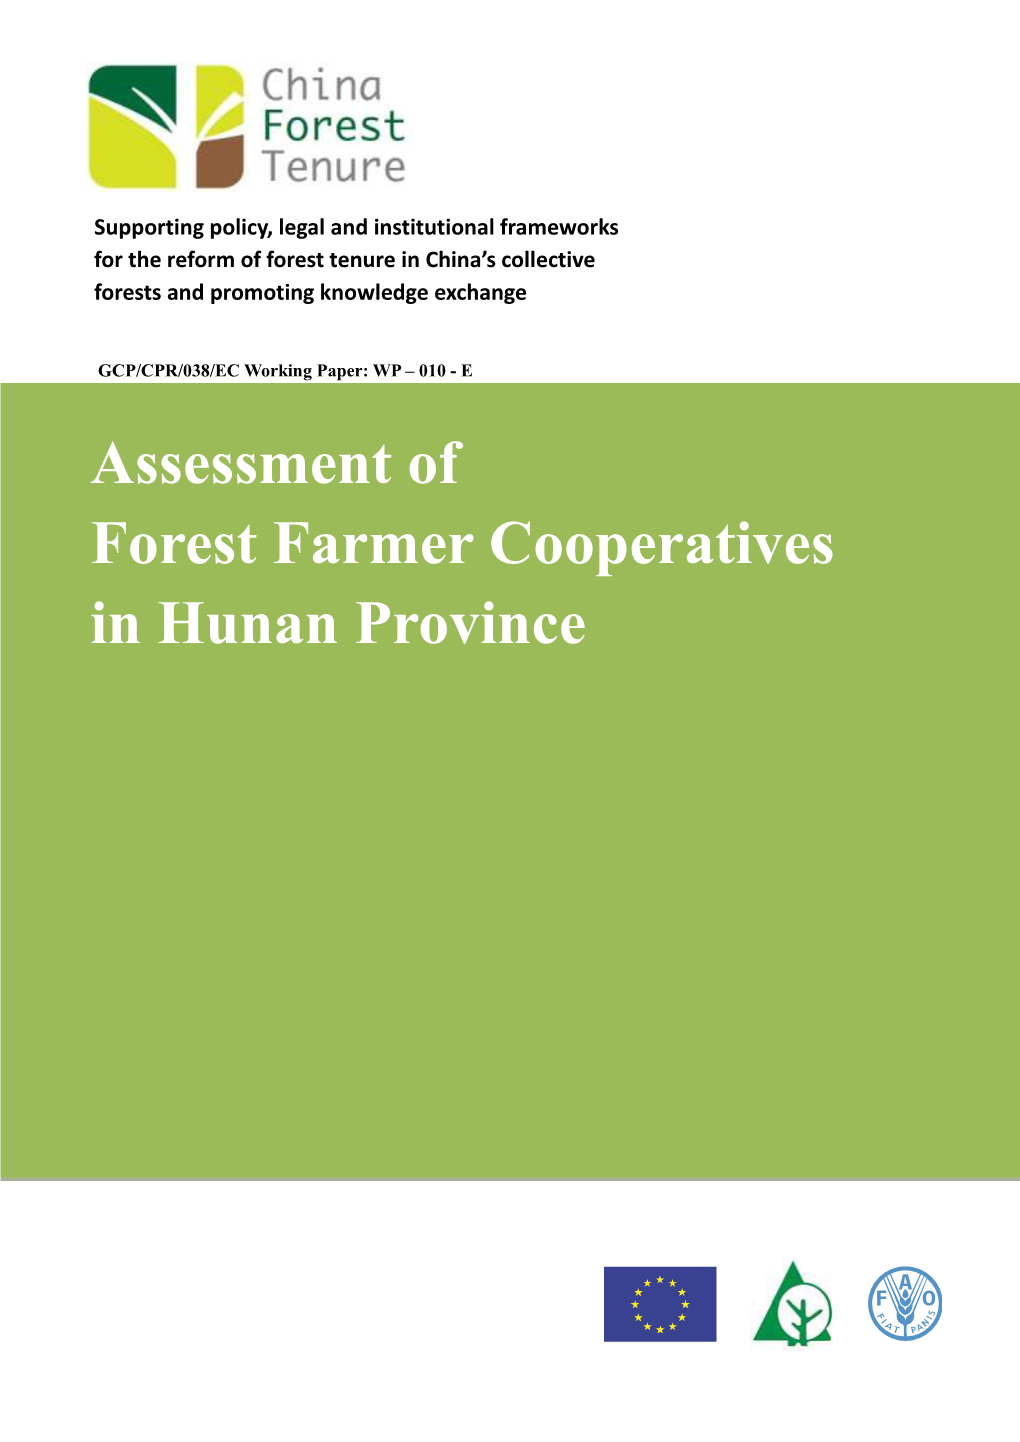 Assessment of Forest Farmer Cooperatives in Hunan Province